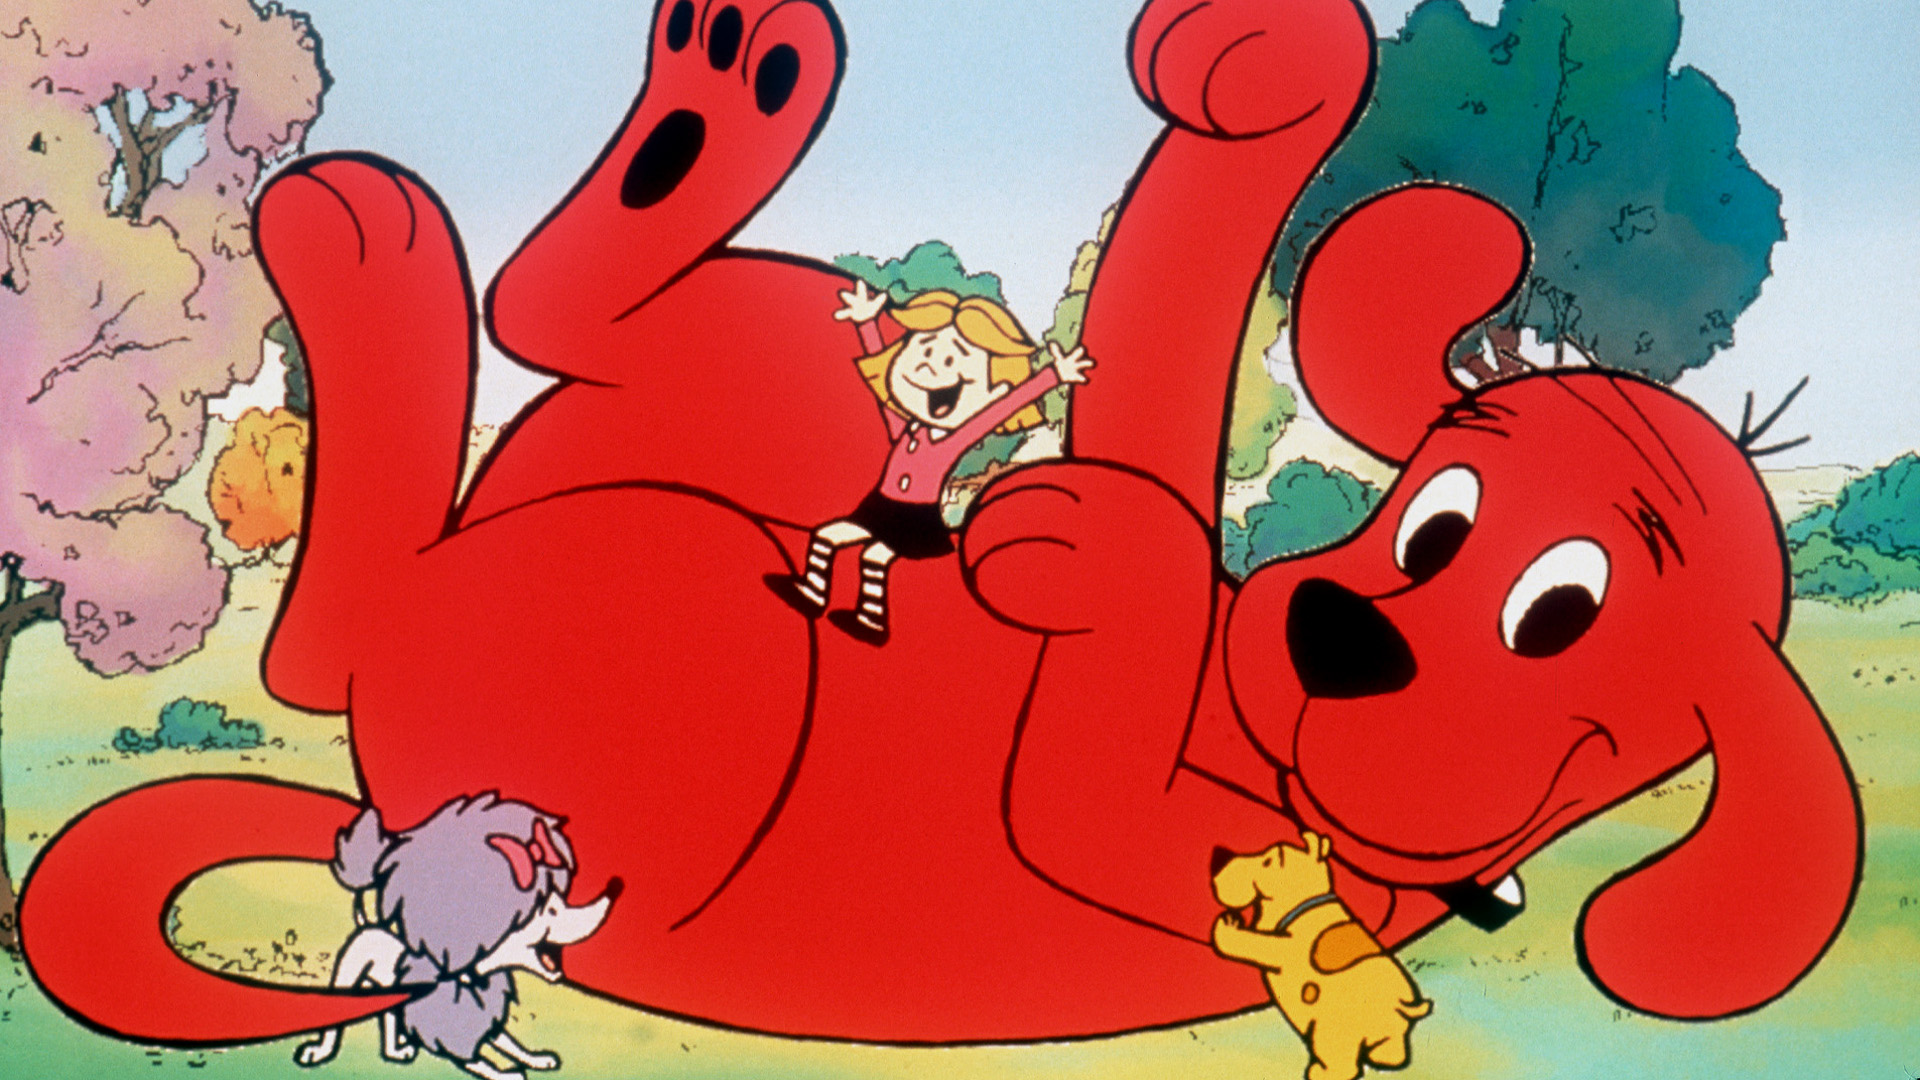 Clifford the Big Red Dog (TV Series 2000 - 2003)